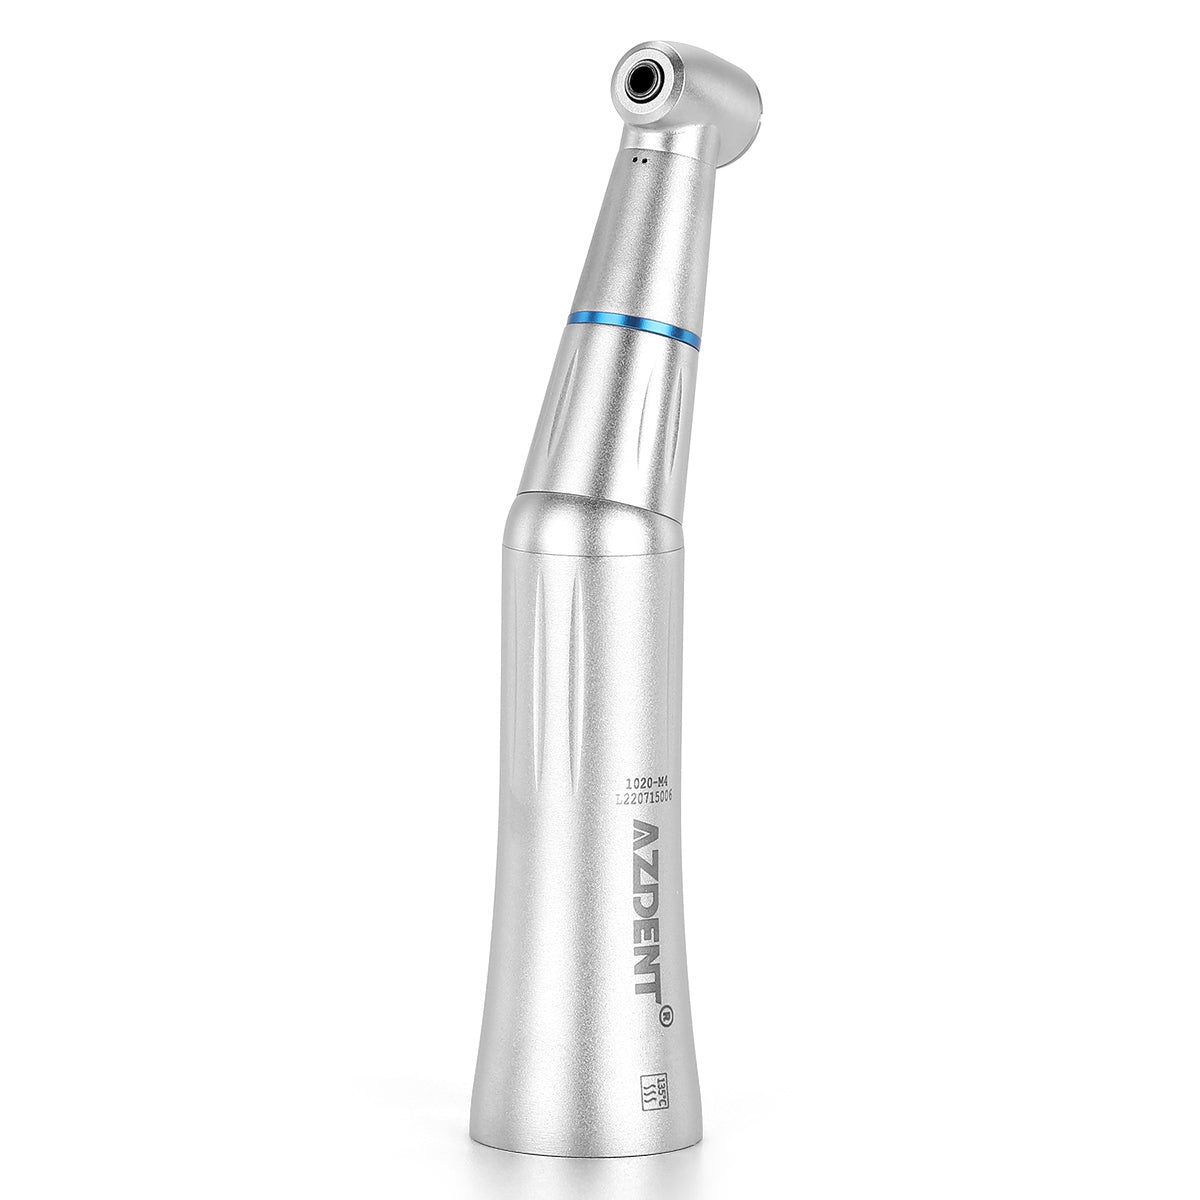 1:1 Low Speed Contra Angle Handpiece Internal Water Push Button - pairaydental.com